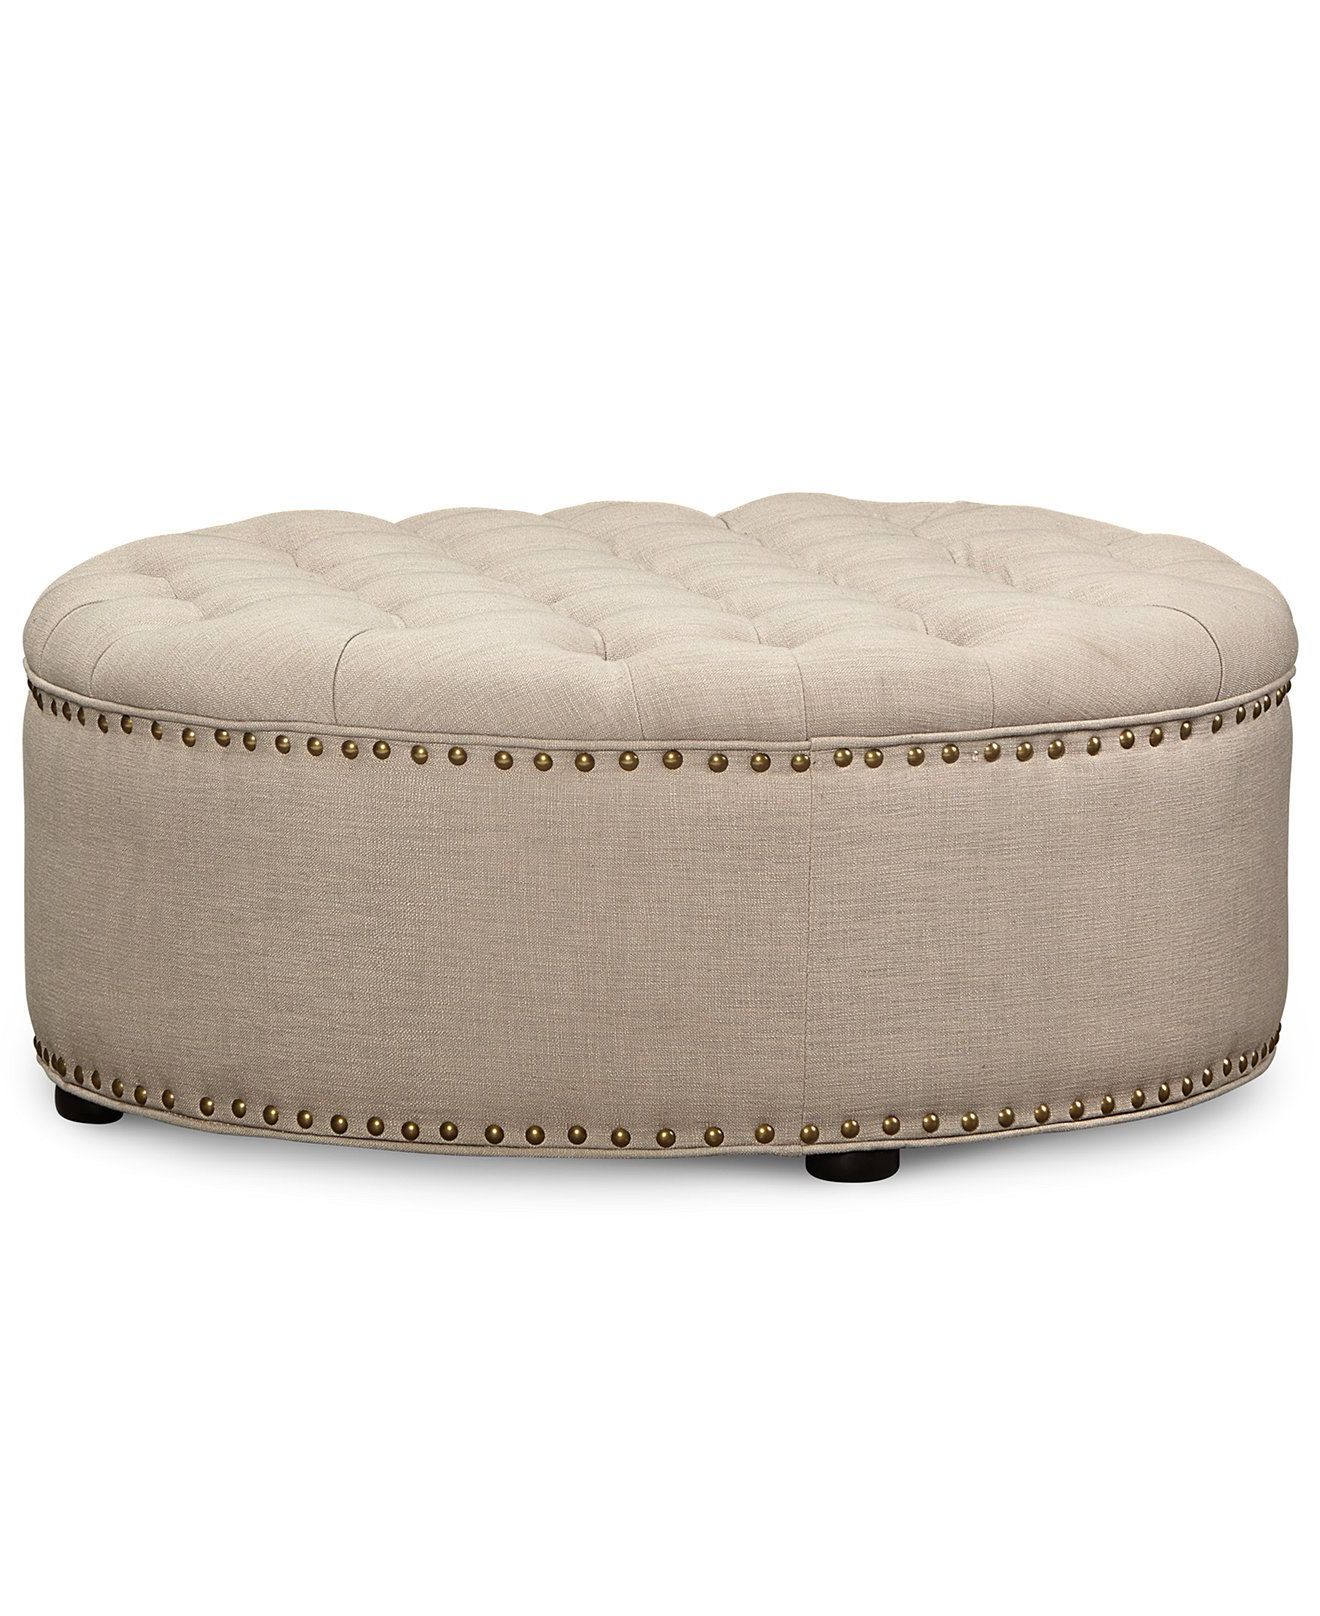 Newest Tufted Fabric Ottomans Inside Johanna Fabric Tufted Cocktail Ottoman, Direct Ship – Ottomans (View 9 of 10)